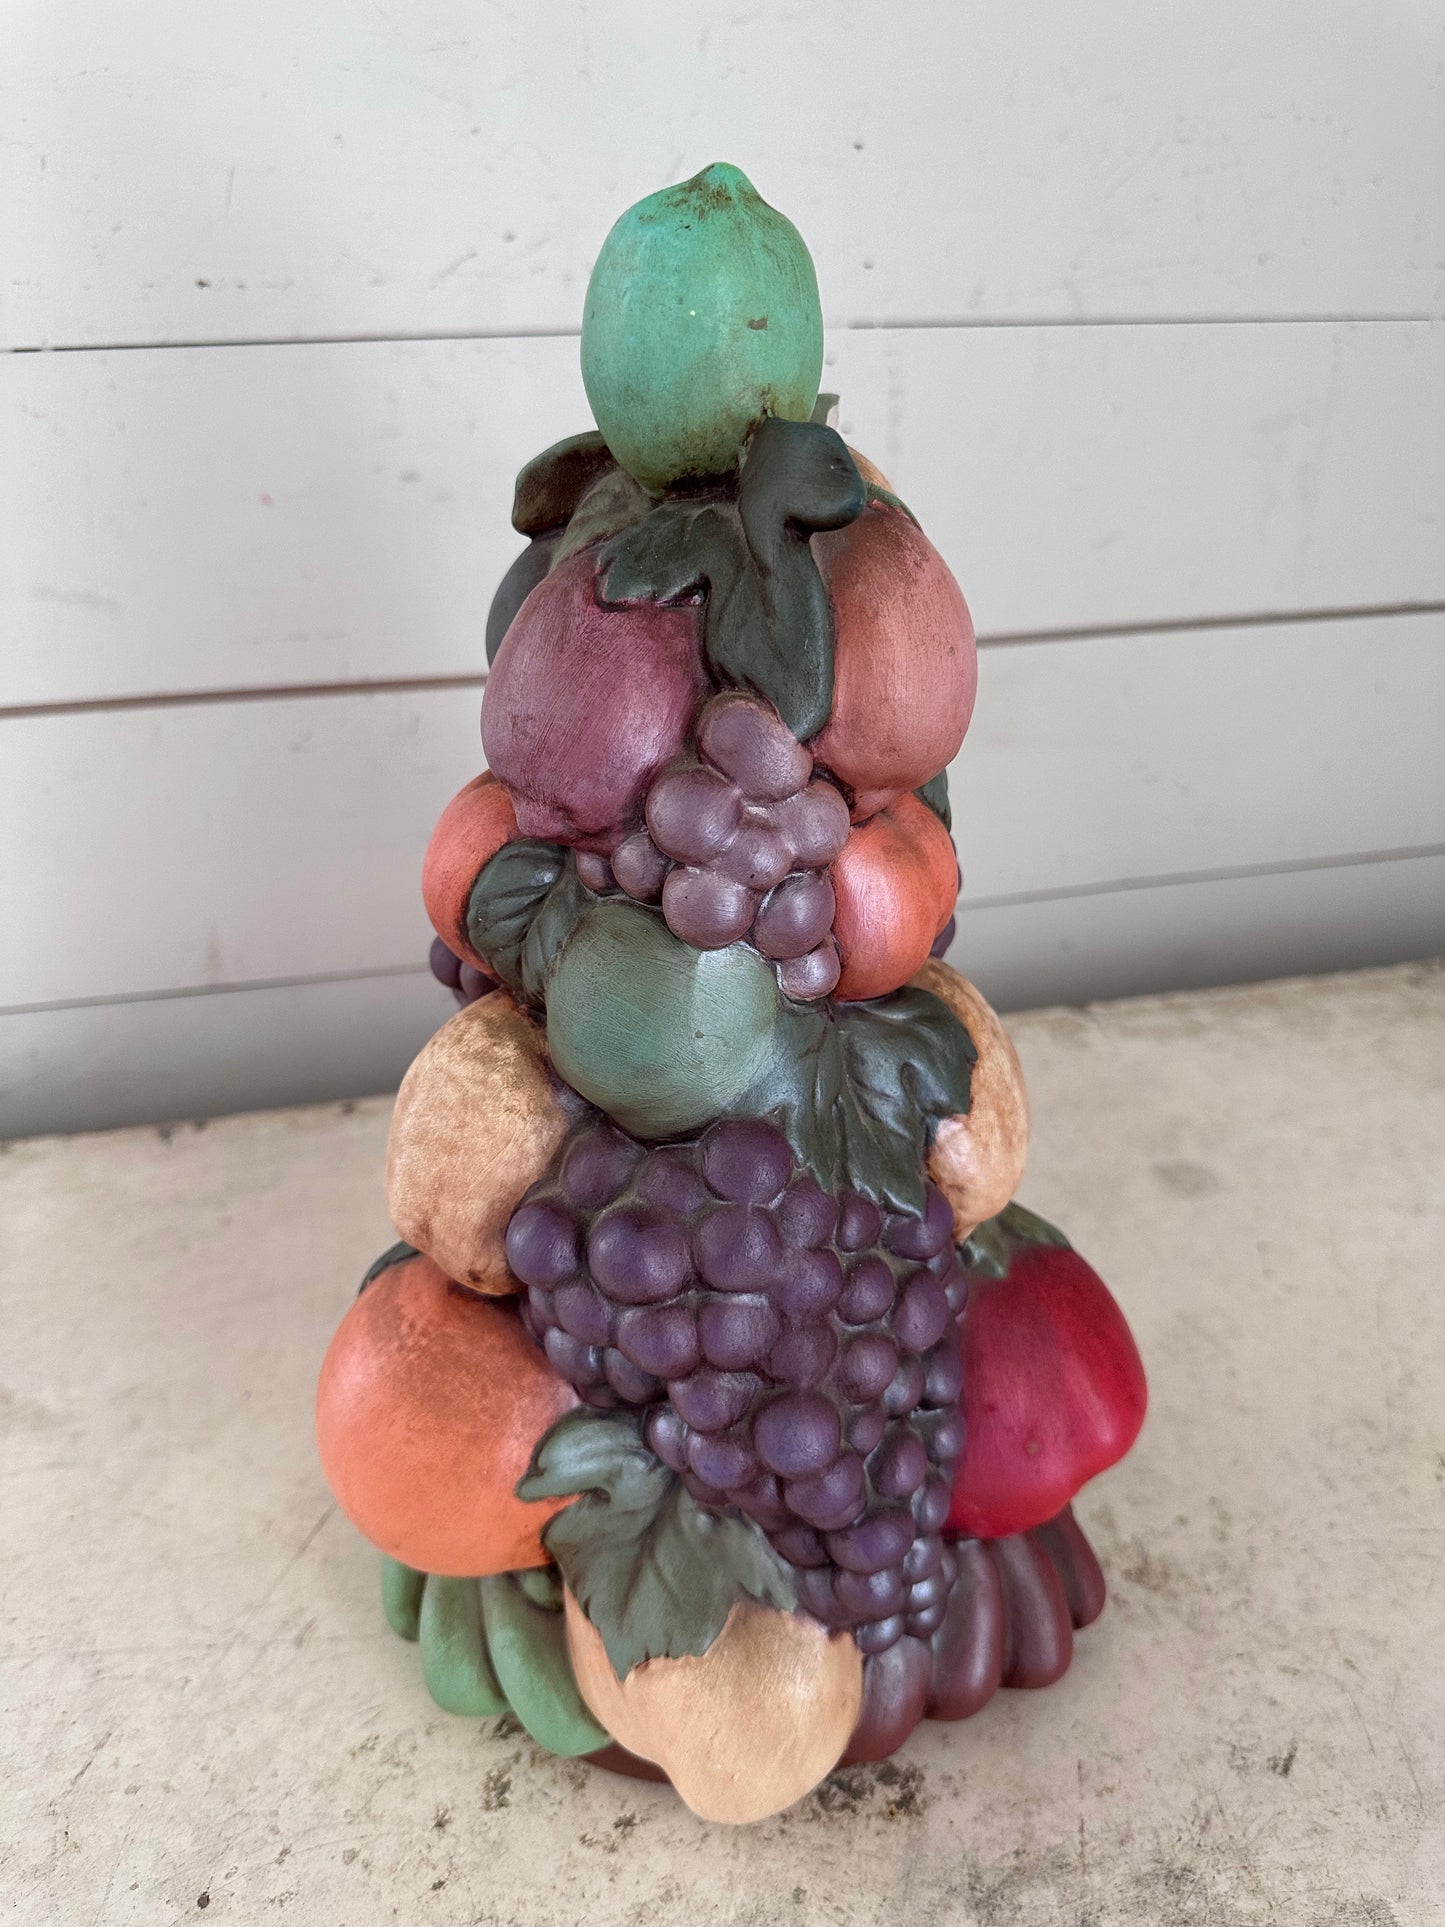 Fruit tower will be painted